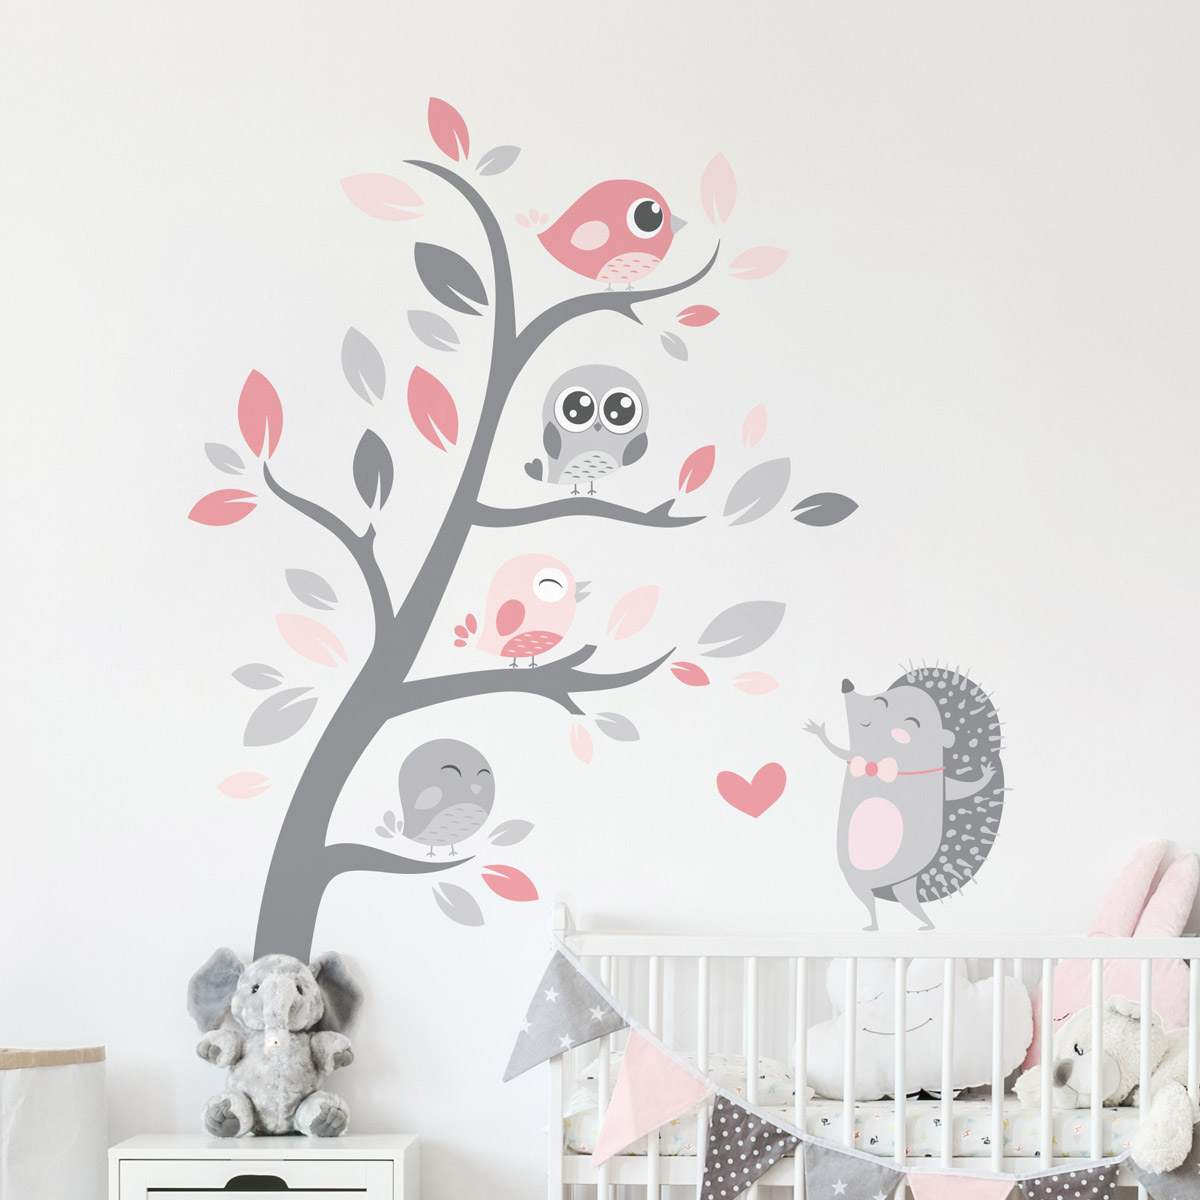 Hedgehog and happy friends birds wall decal